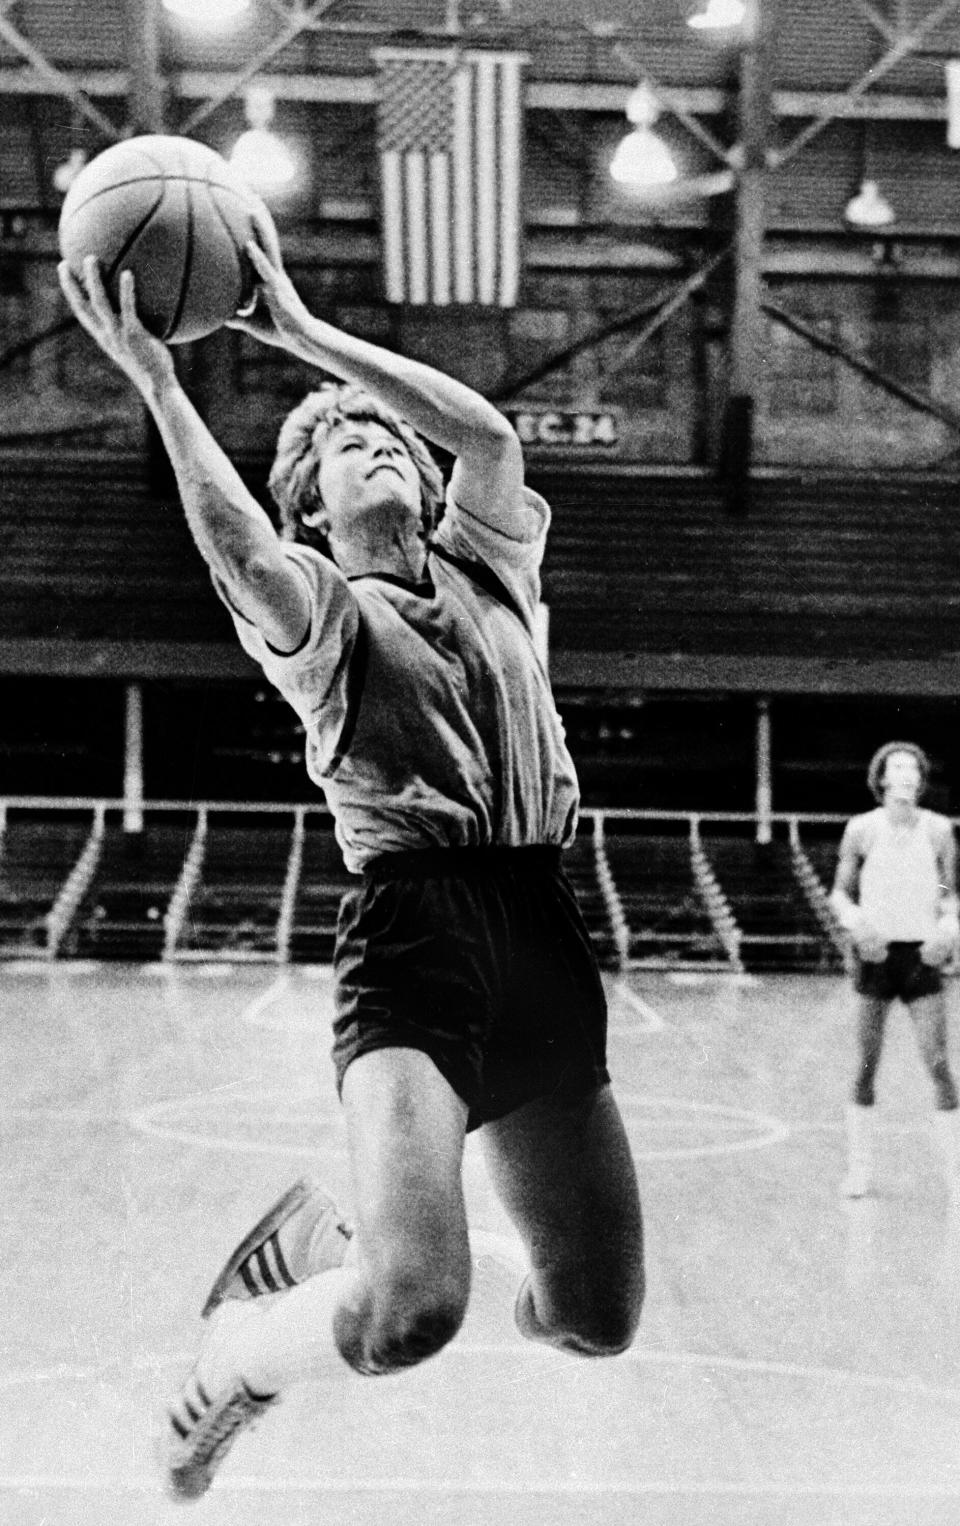 FILE - Ann Meyers drives during practice at the NBA rookie camp for the Indiana Pacers in Indianapolis, Sept. 10, 1978. The Hall of Famer, long-time TV basketball analyst and mother of three shares how Title IX has shaped her life and career in an essay for The Associated Press, and what needs to be done over the next 50 years for the law to continue to have a positive impact on young girls and women. (AP Photo/File)